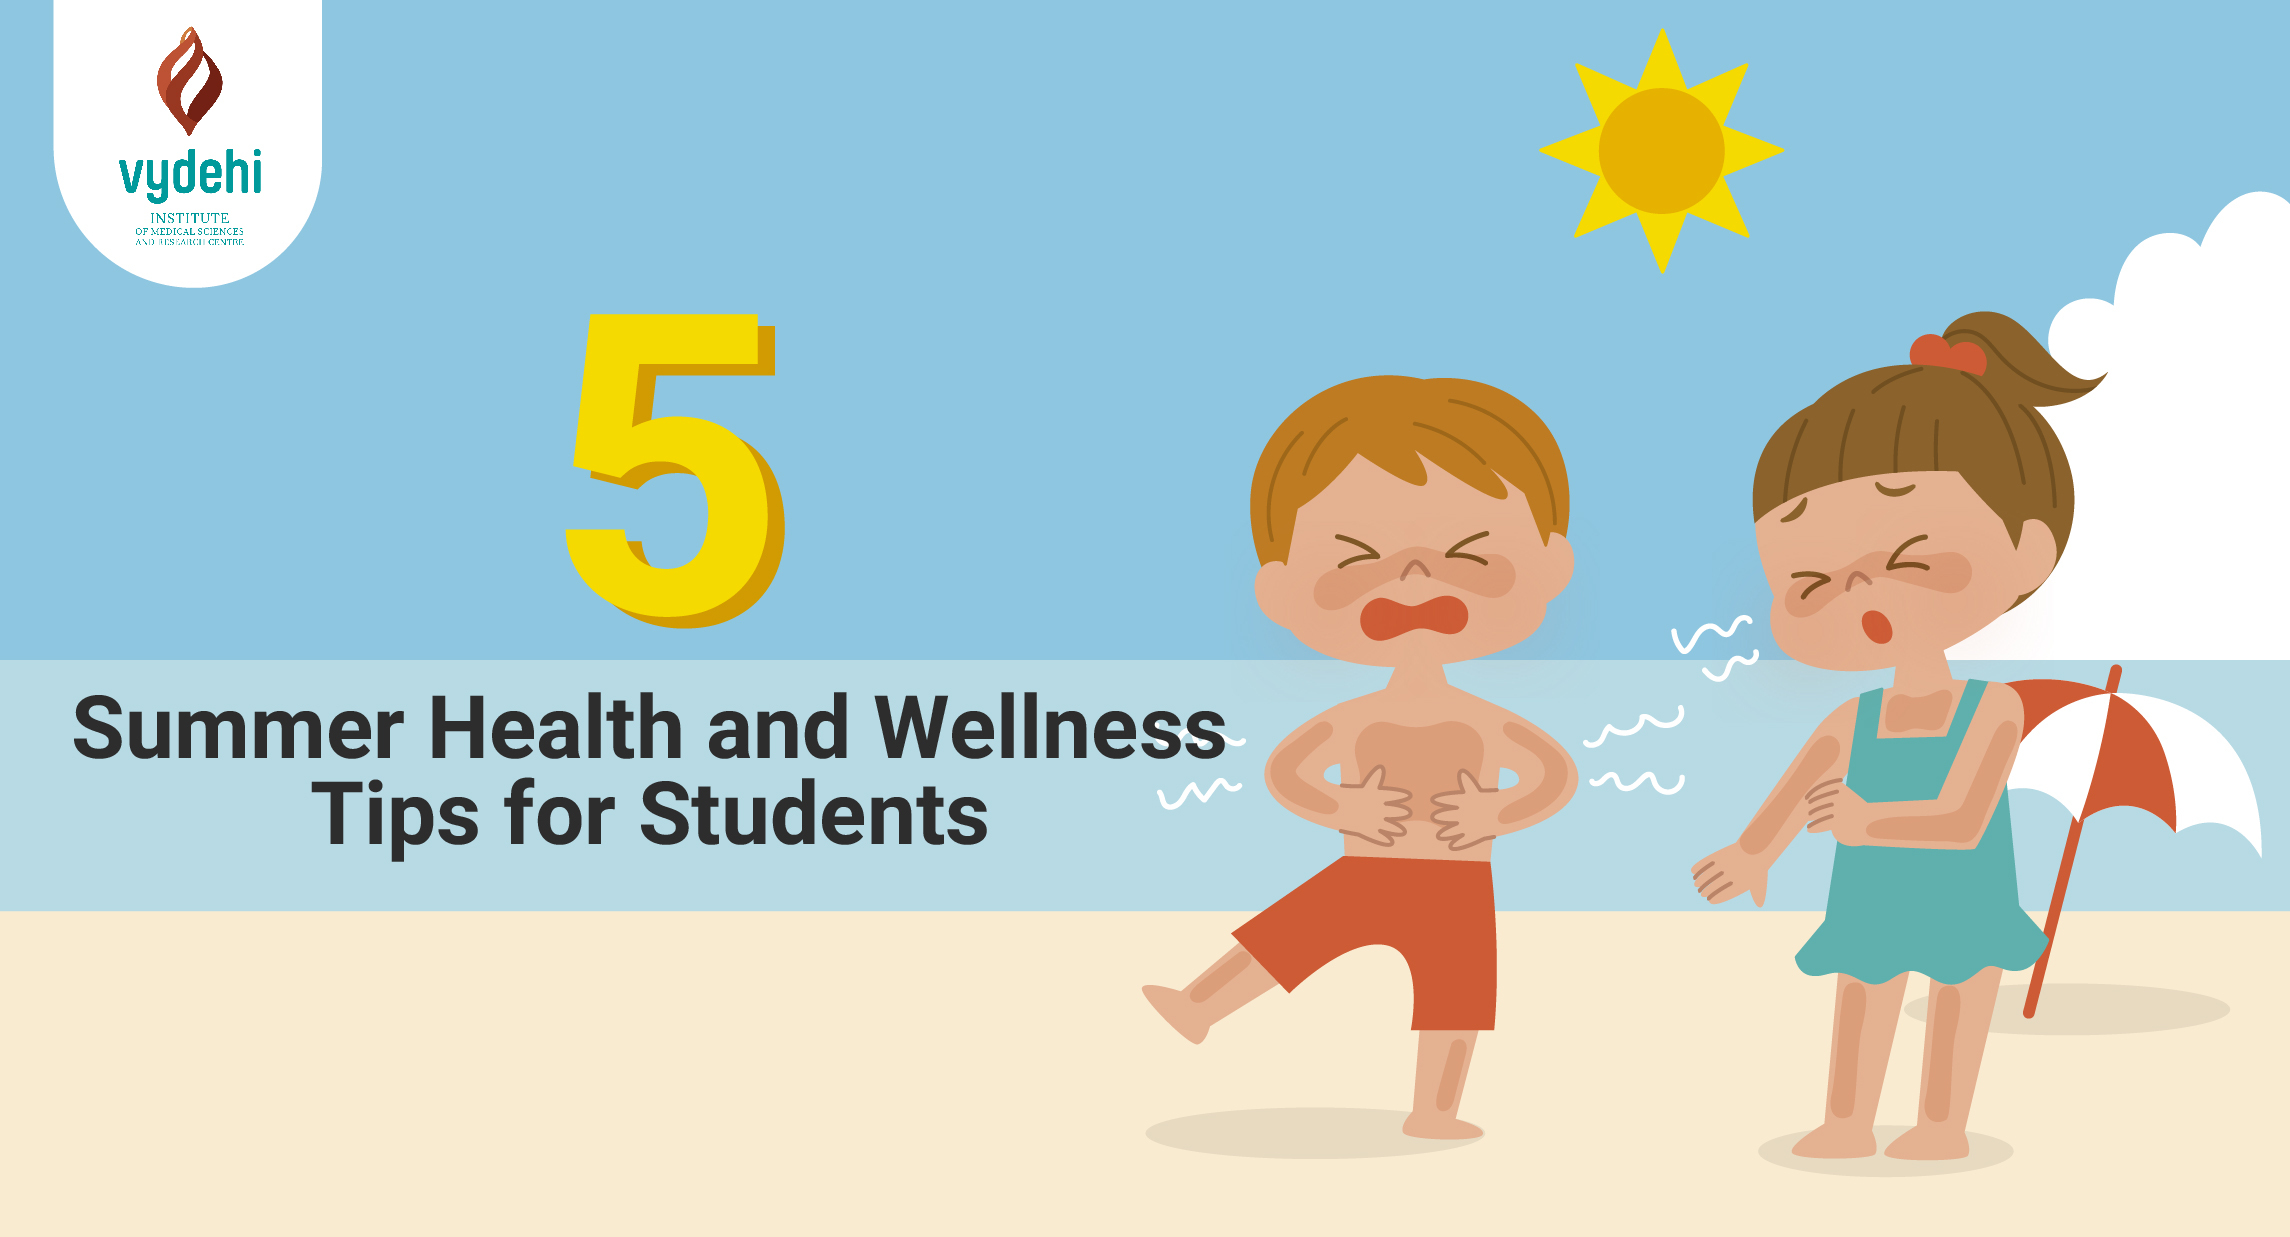 Summer Health and Wellness Tips for Students